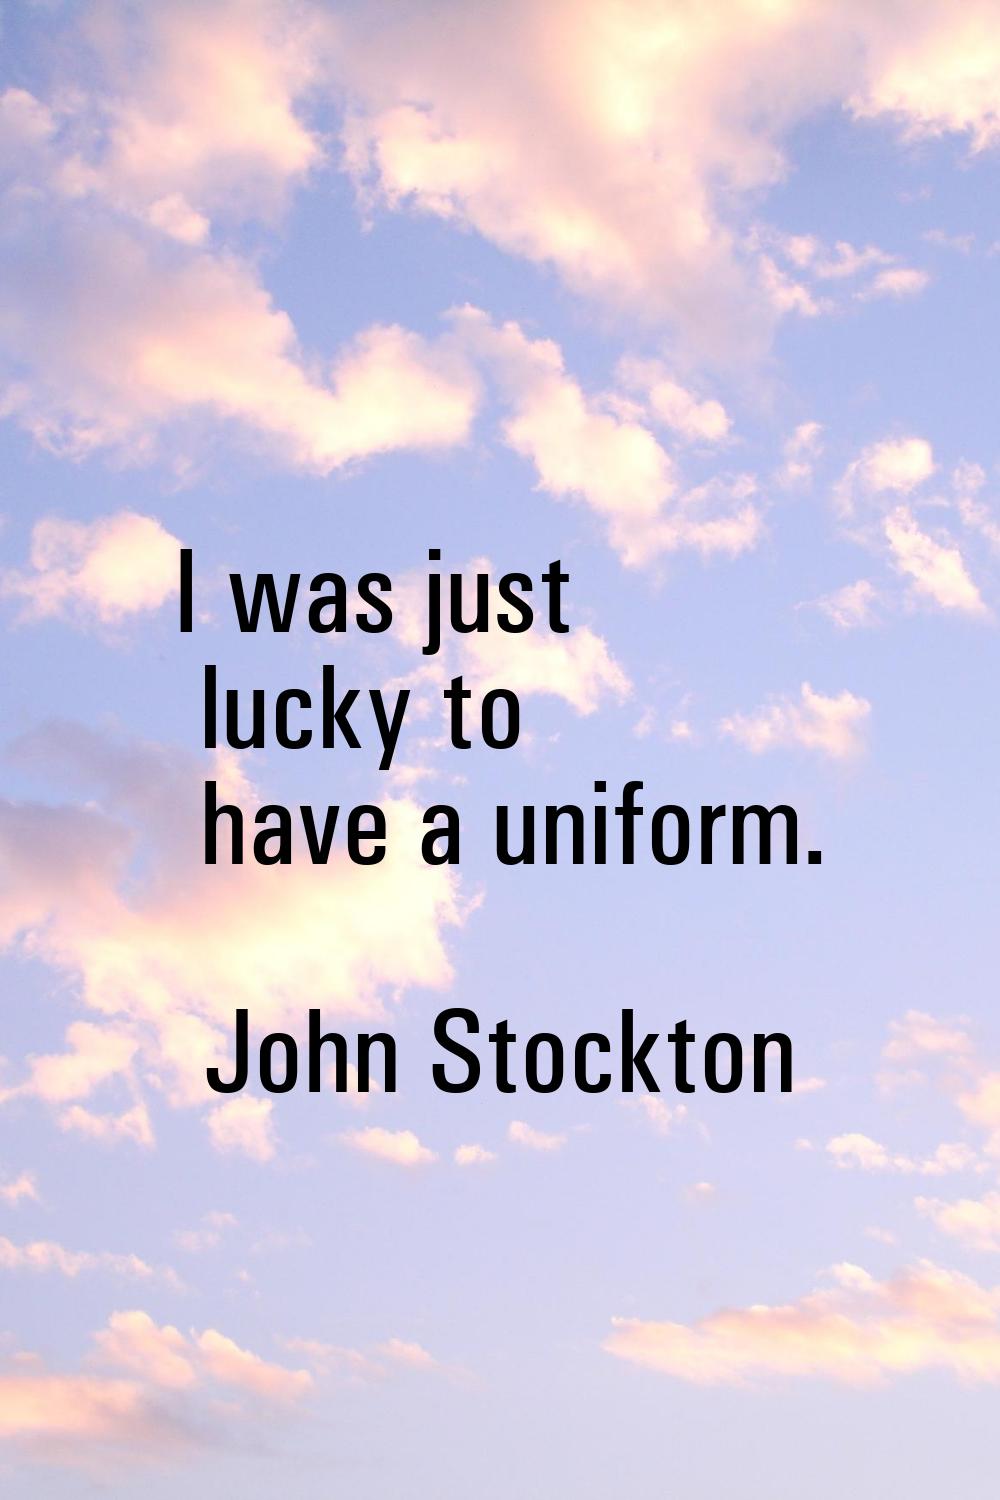 I was just lucky to have a uniform.